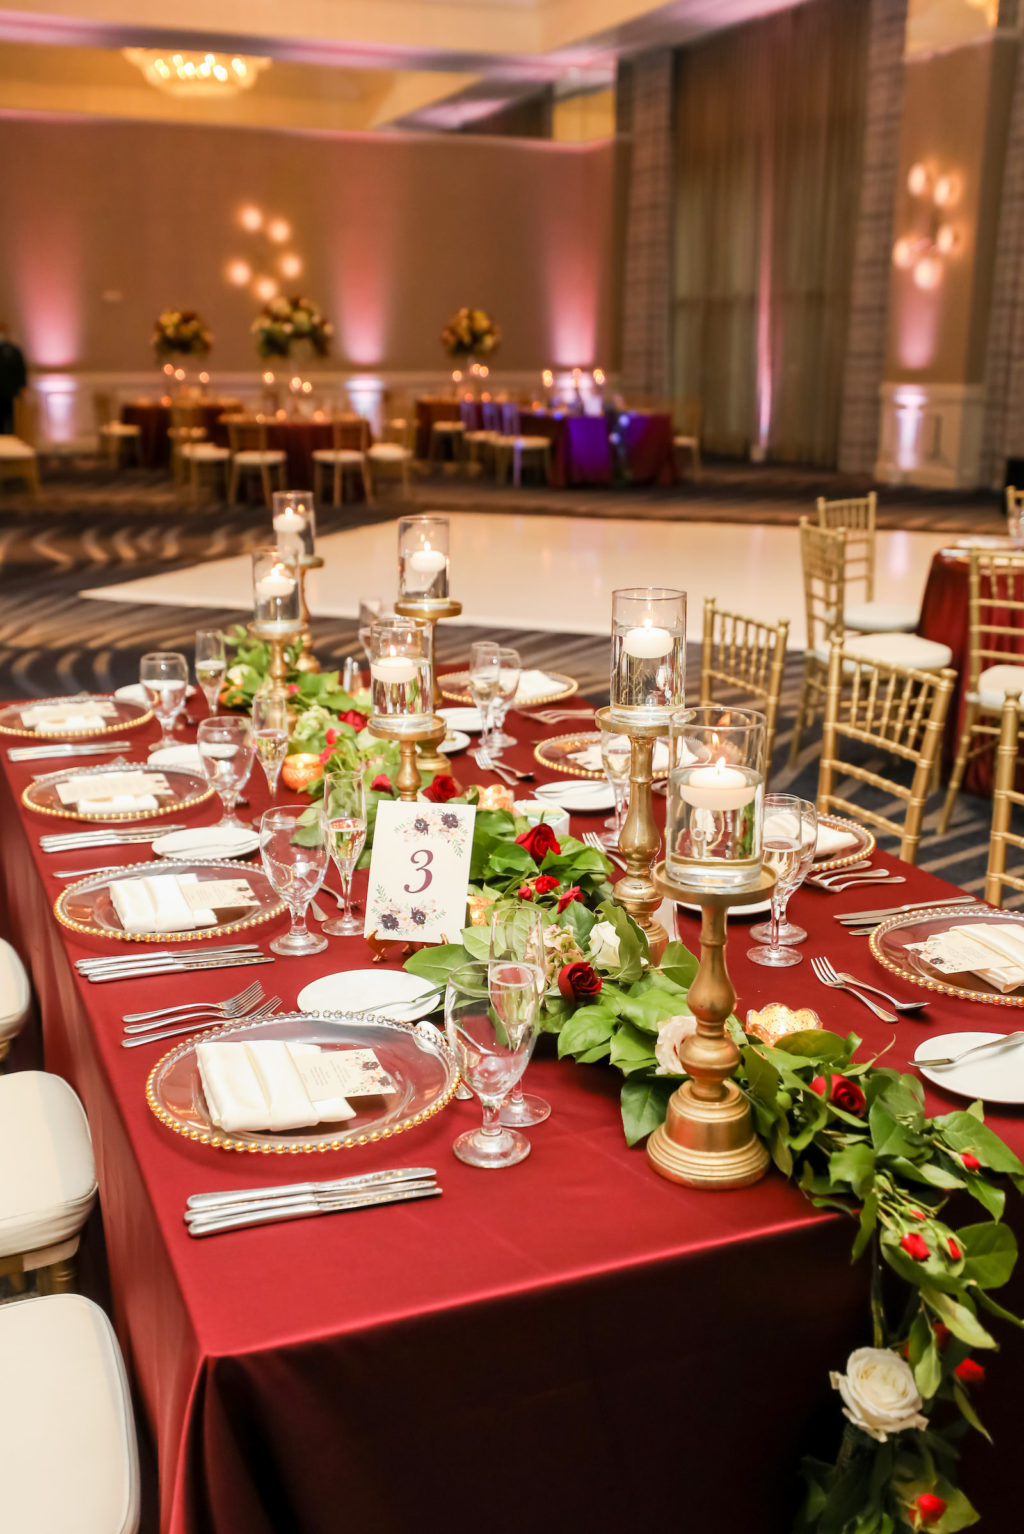 Indian Hindu Wedding Ballroom Reception Decor, Long Table with Burgundy Red Table Linen, Clear and Gold Beaded Charger, Greenery Garland Table Runner, Floating Candlesticks, Gold Chiavari Chairs | Tampa Bay Wedding Photographer Lifelong Photography Studios | Wedding Venue Grand Hyatt Tampa Bay